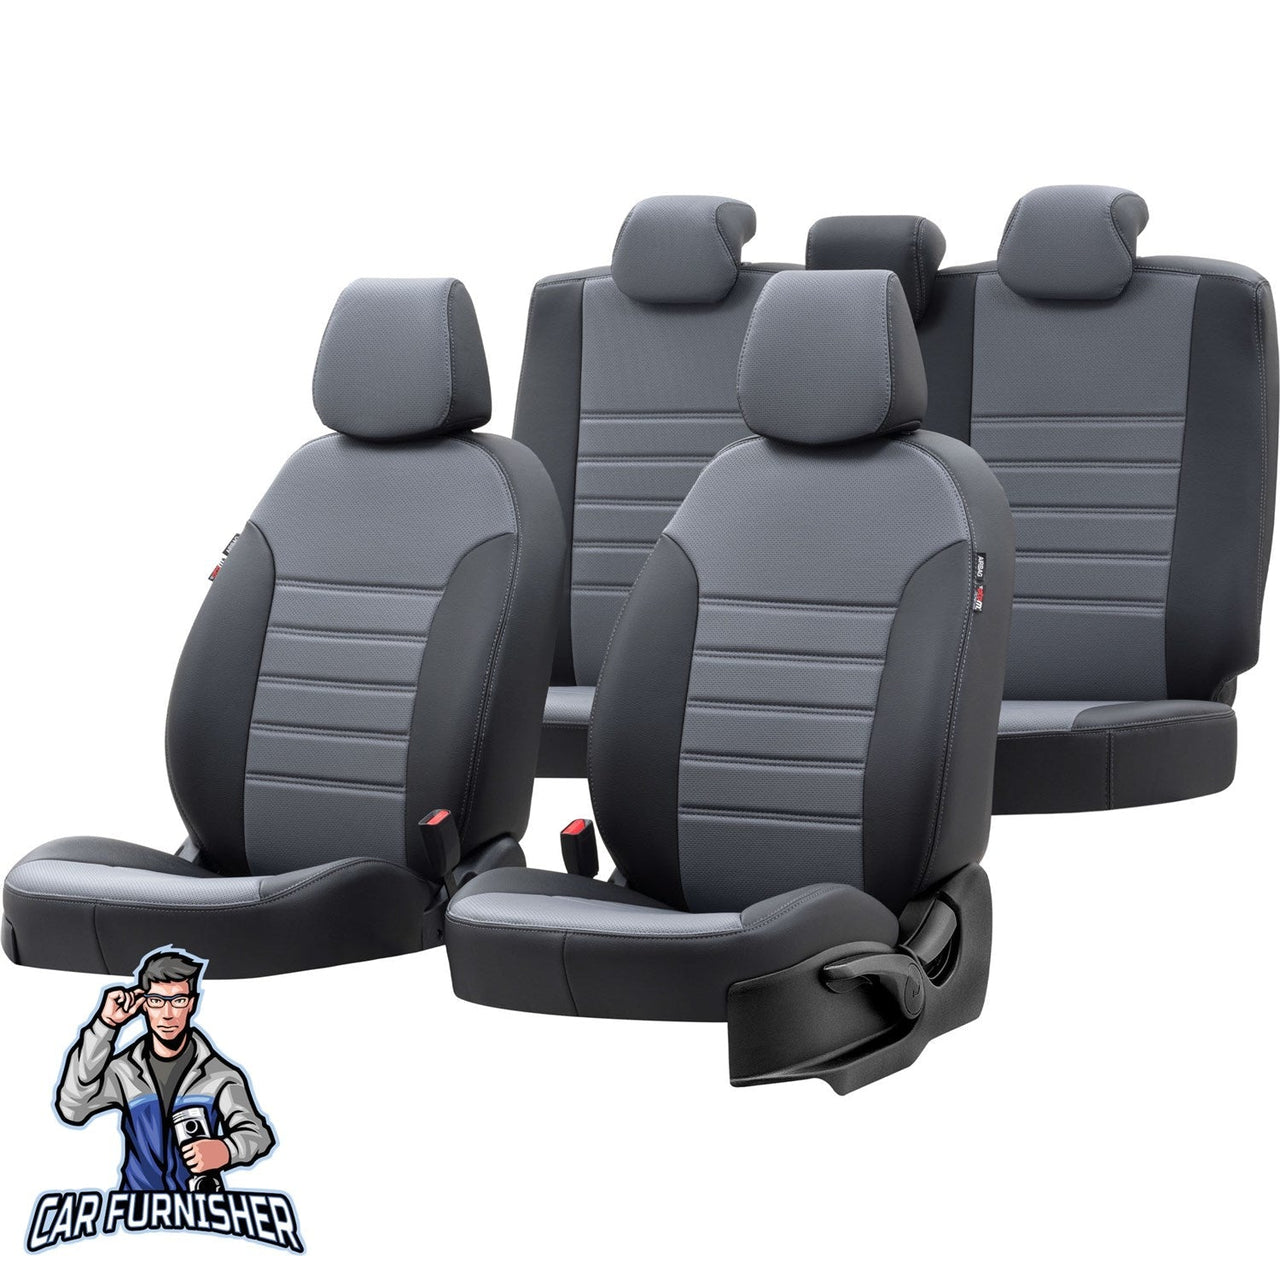 Subaru Forester Seat Cover New York Leather Design Smoked Black Leather